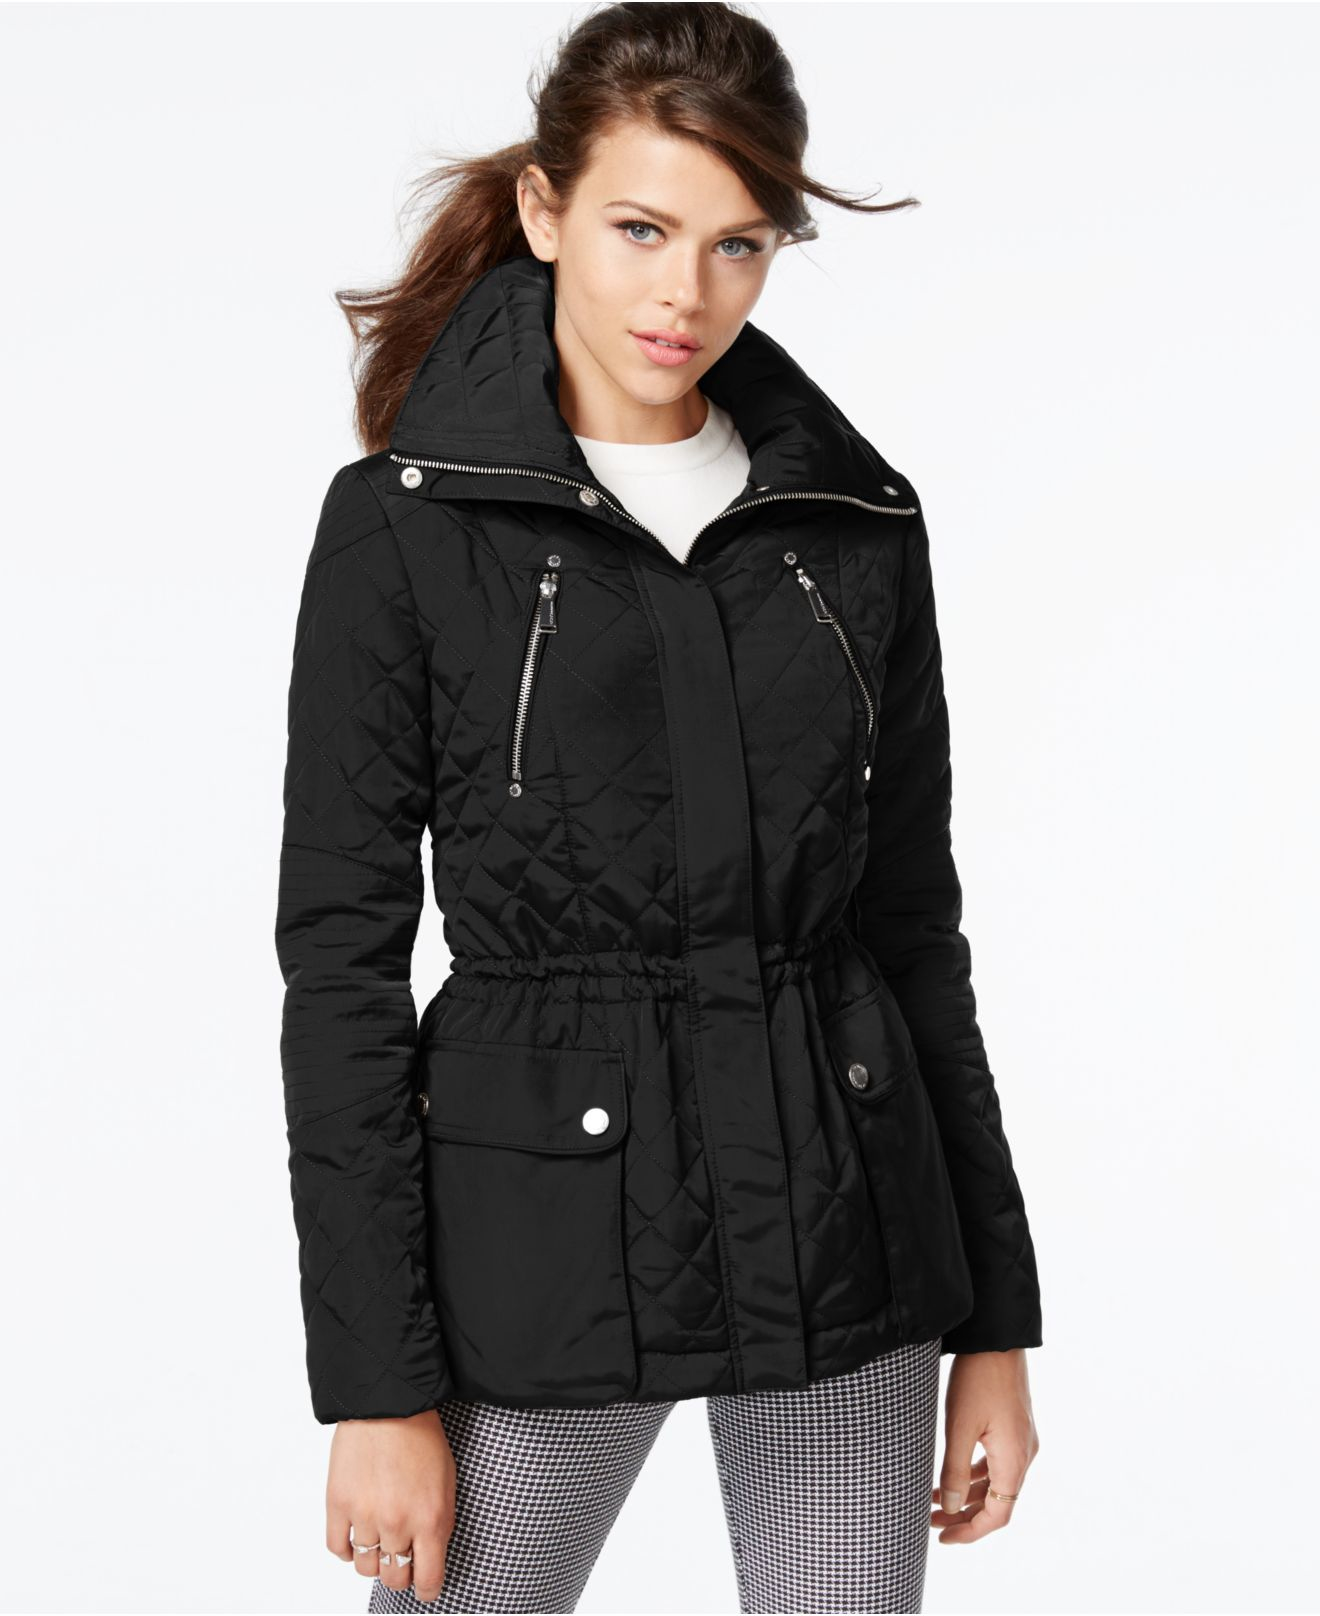 Bcbgeneration Hooded Quilted Anorak Jacket in Black | Lyst